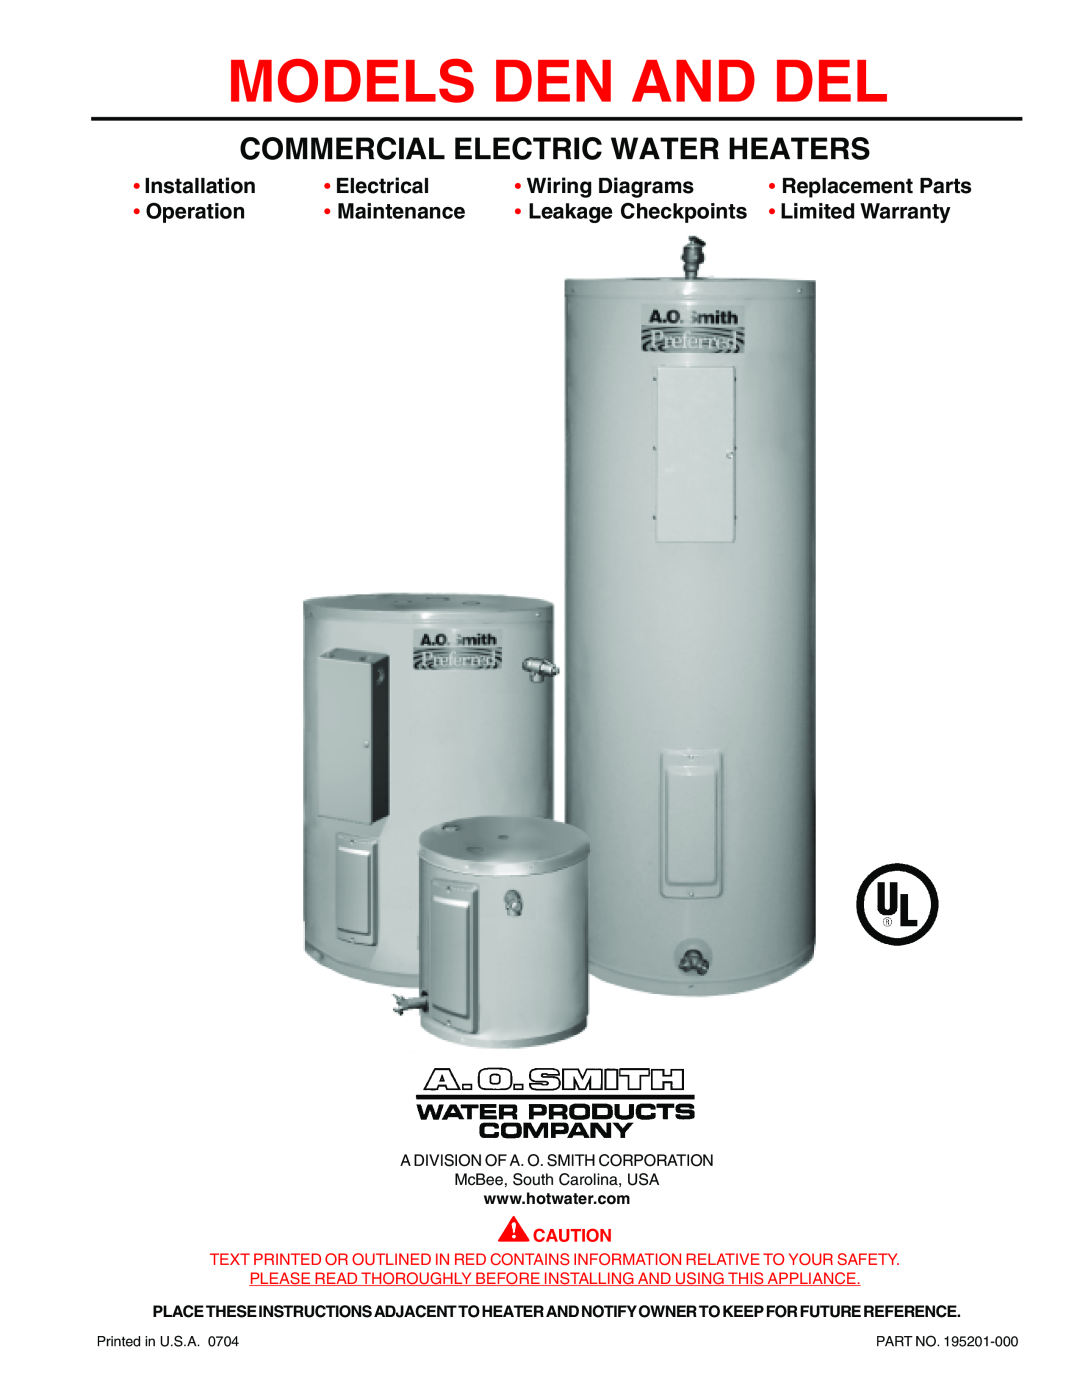 A.O. Smith DEL warranty Commercial Electric Water Heaters, Models Den And Del, Installation, Electrical, Wiring Diagrams 